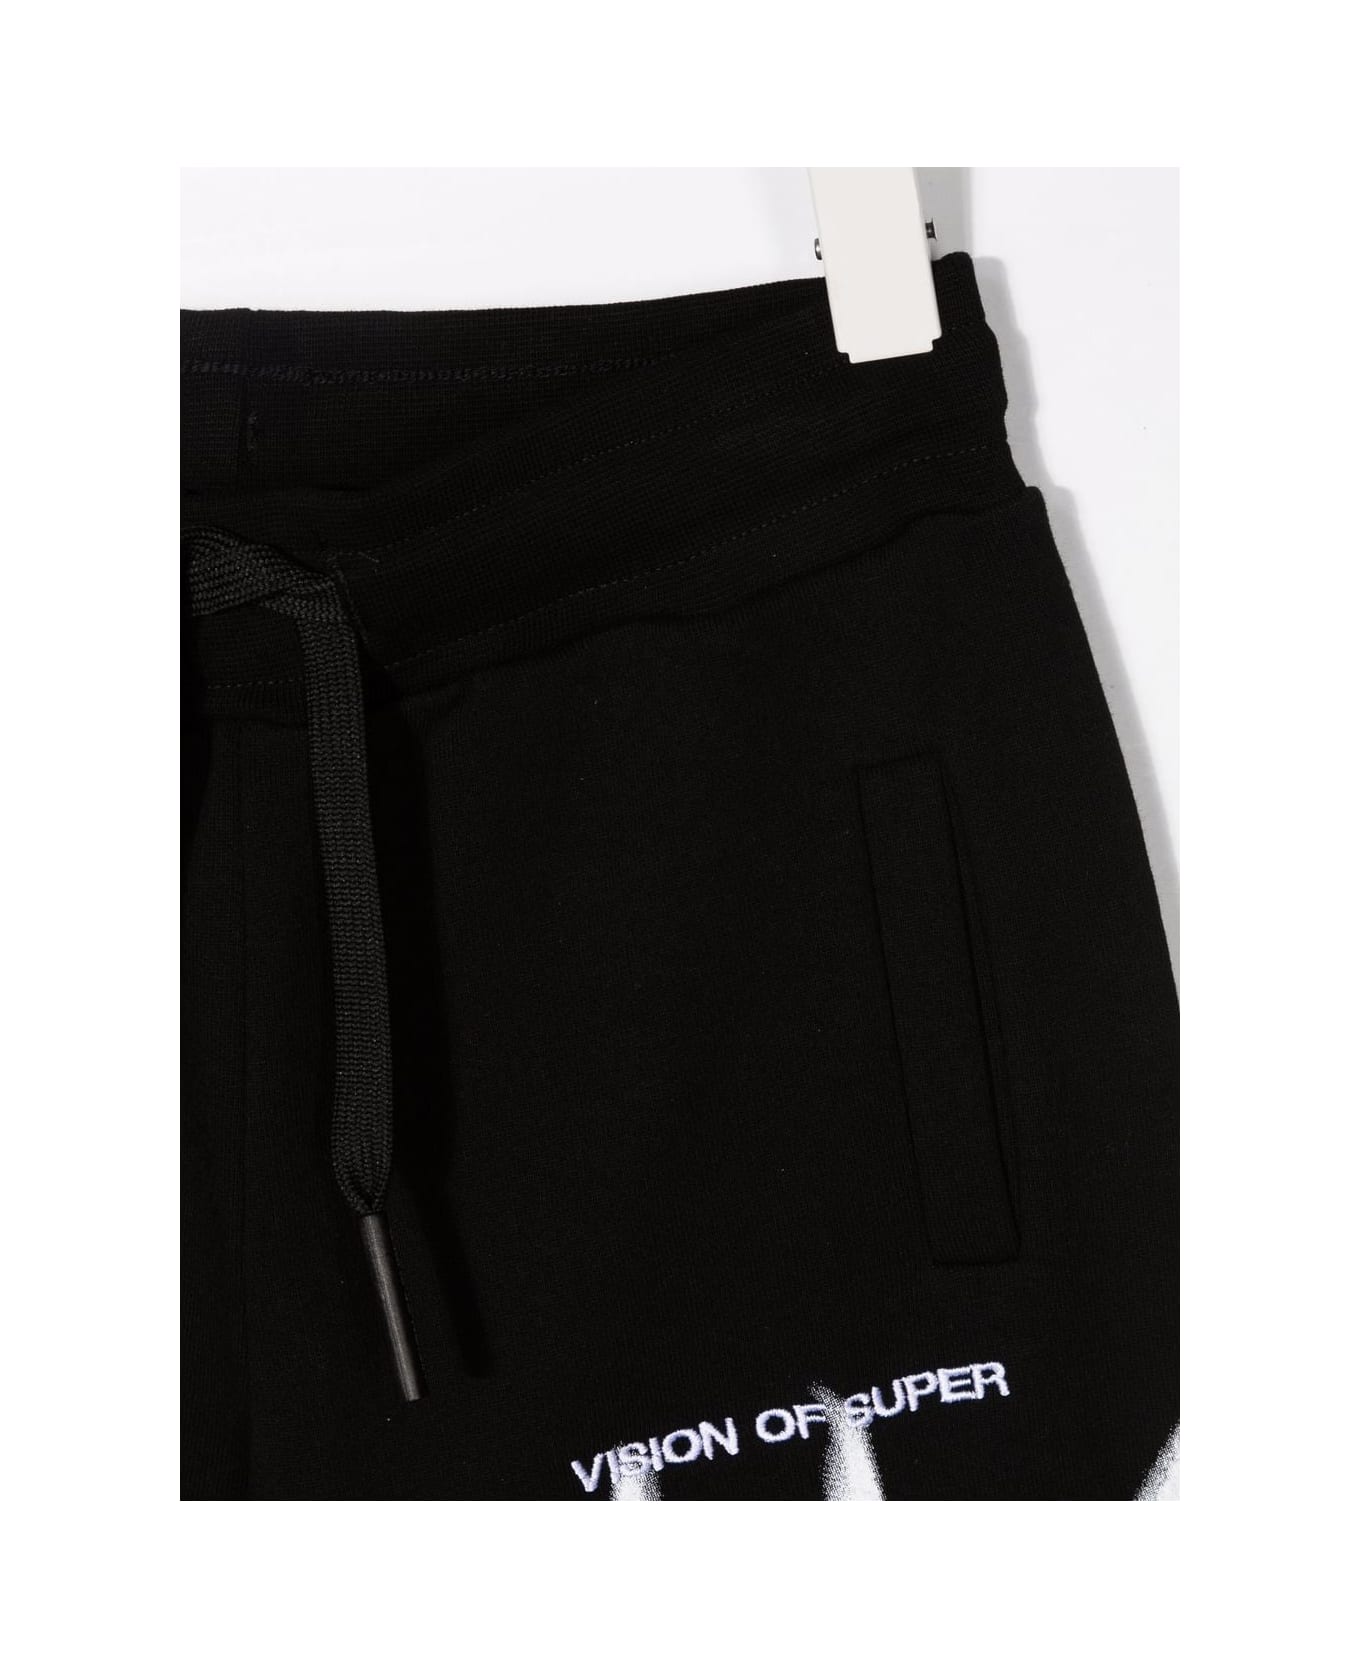 Vision of Super Kids Black Sports Shorts With White Spray Flames Print - Black